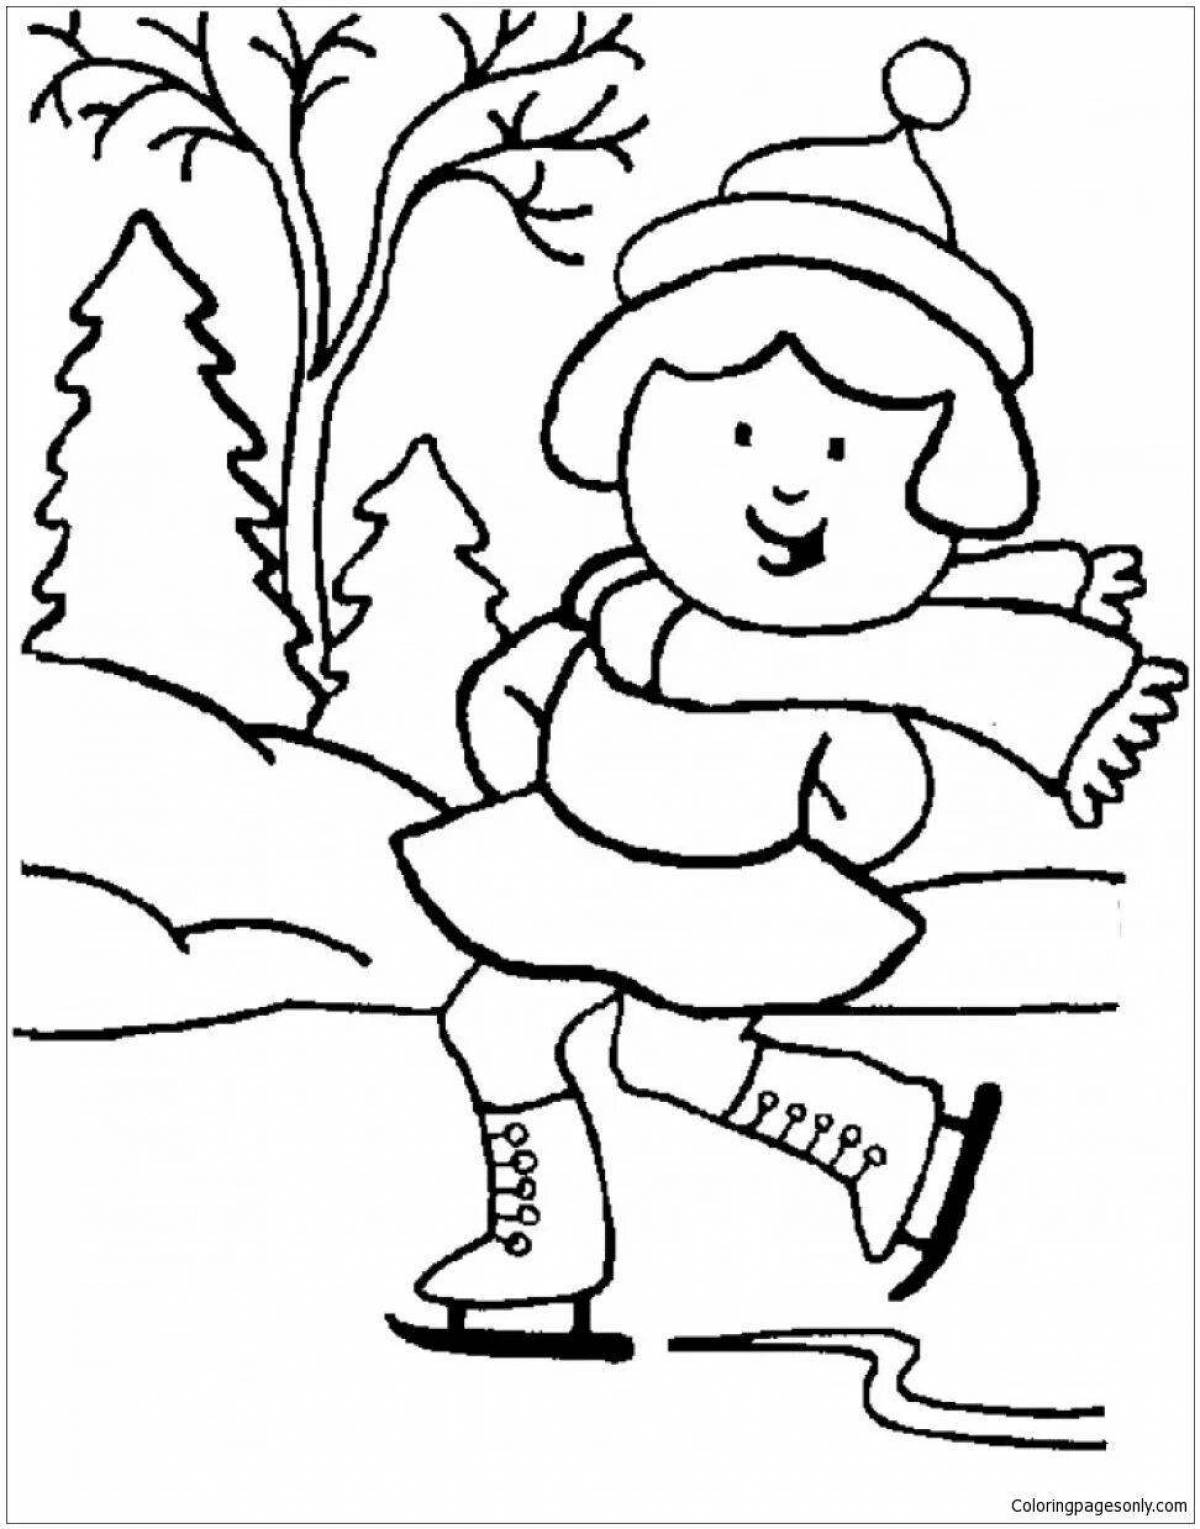 Anniversary coloring book for children outdoors in winter